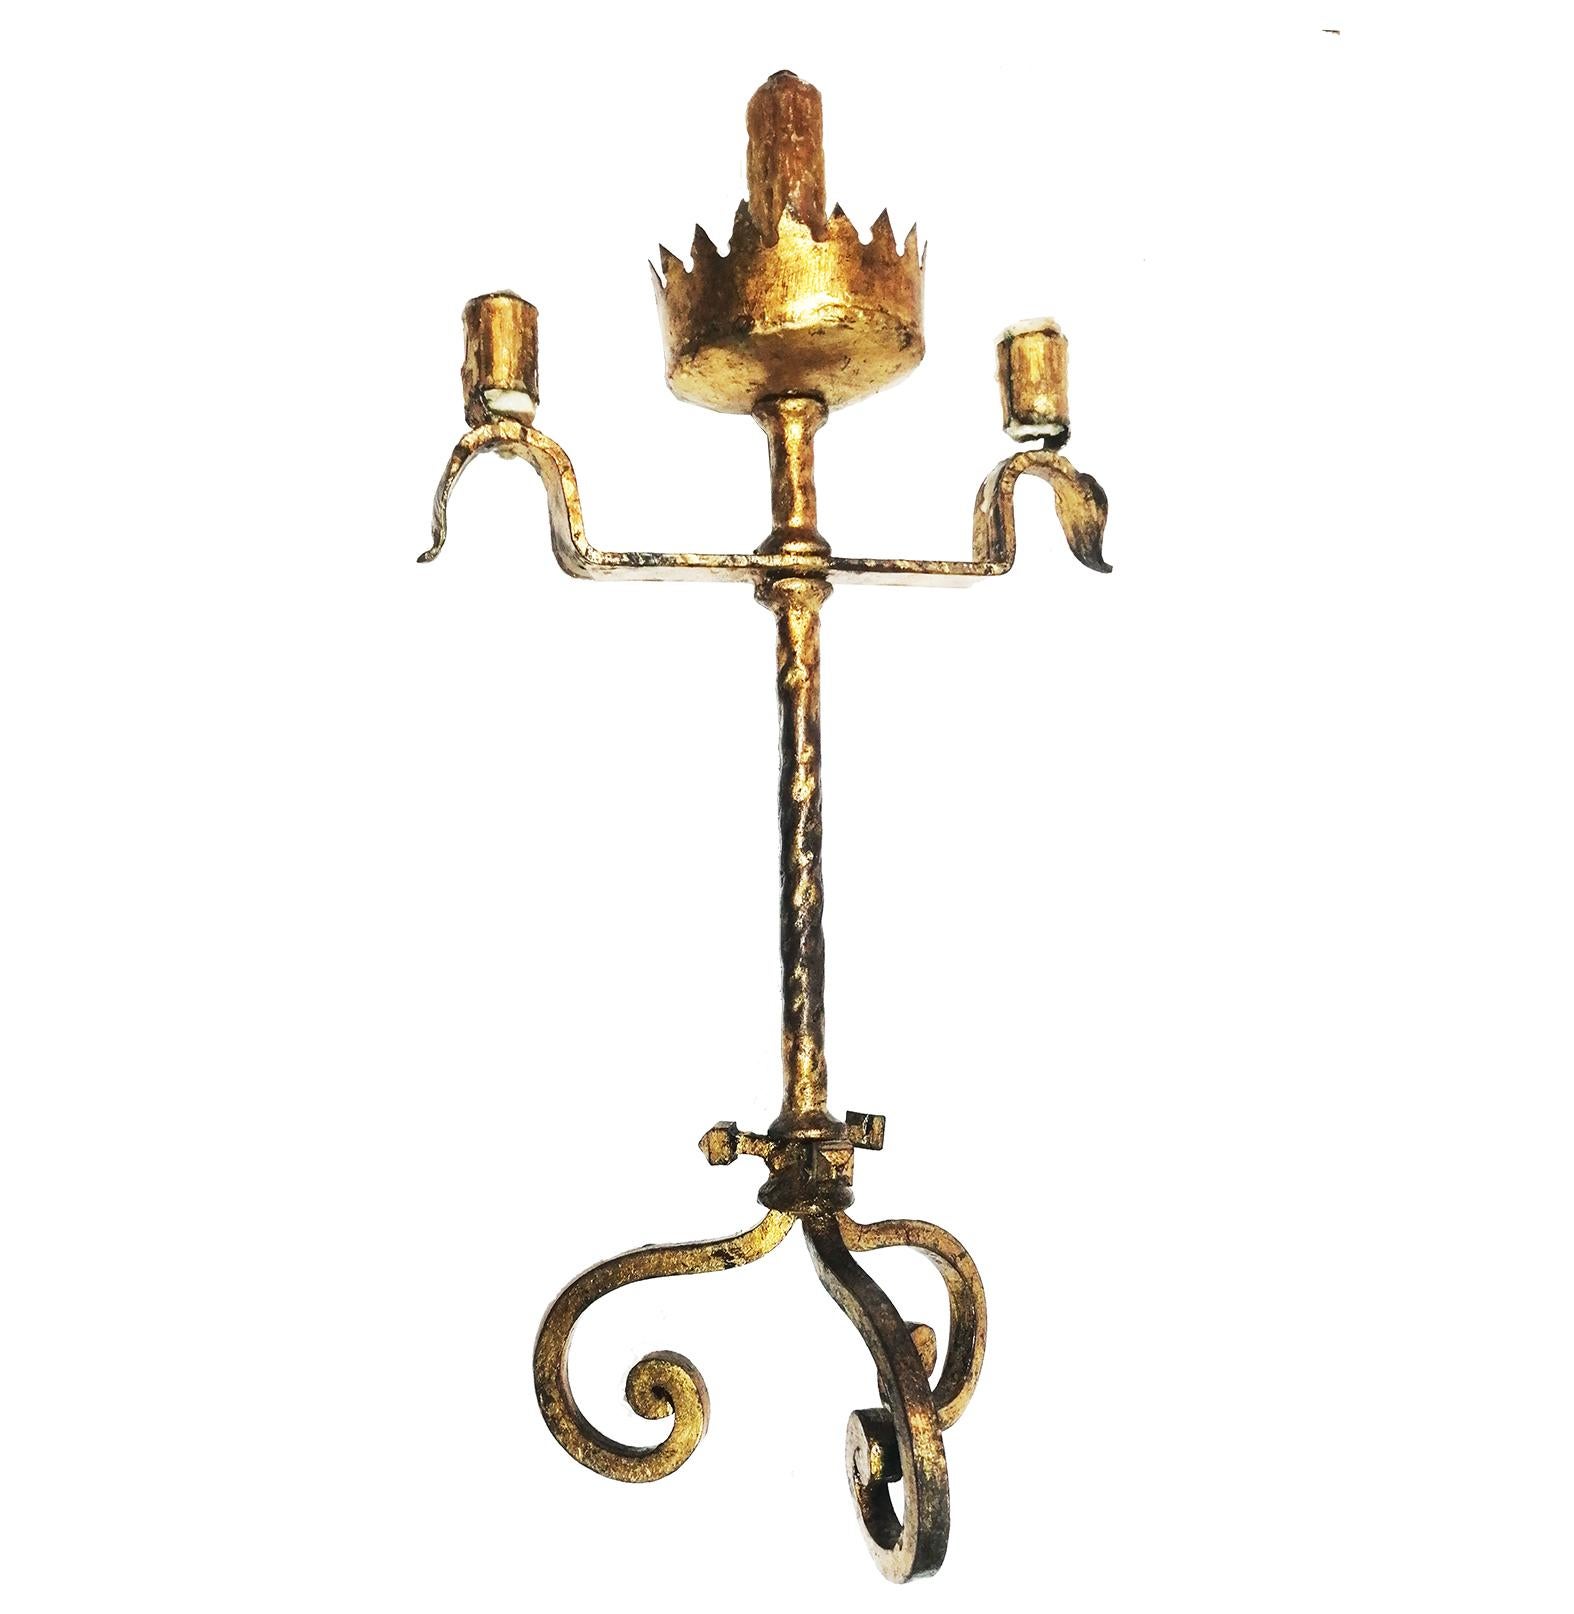 Medieval Wrought Iron and Gold  Votive Candelabra Electrified or Table Lamp For Sale